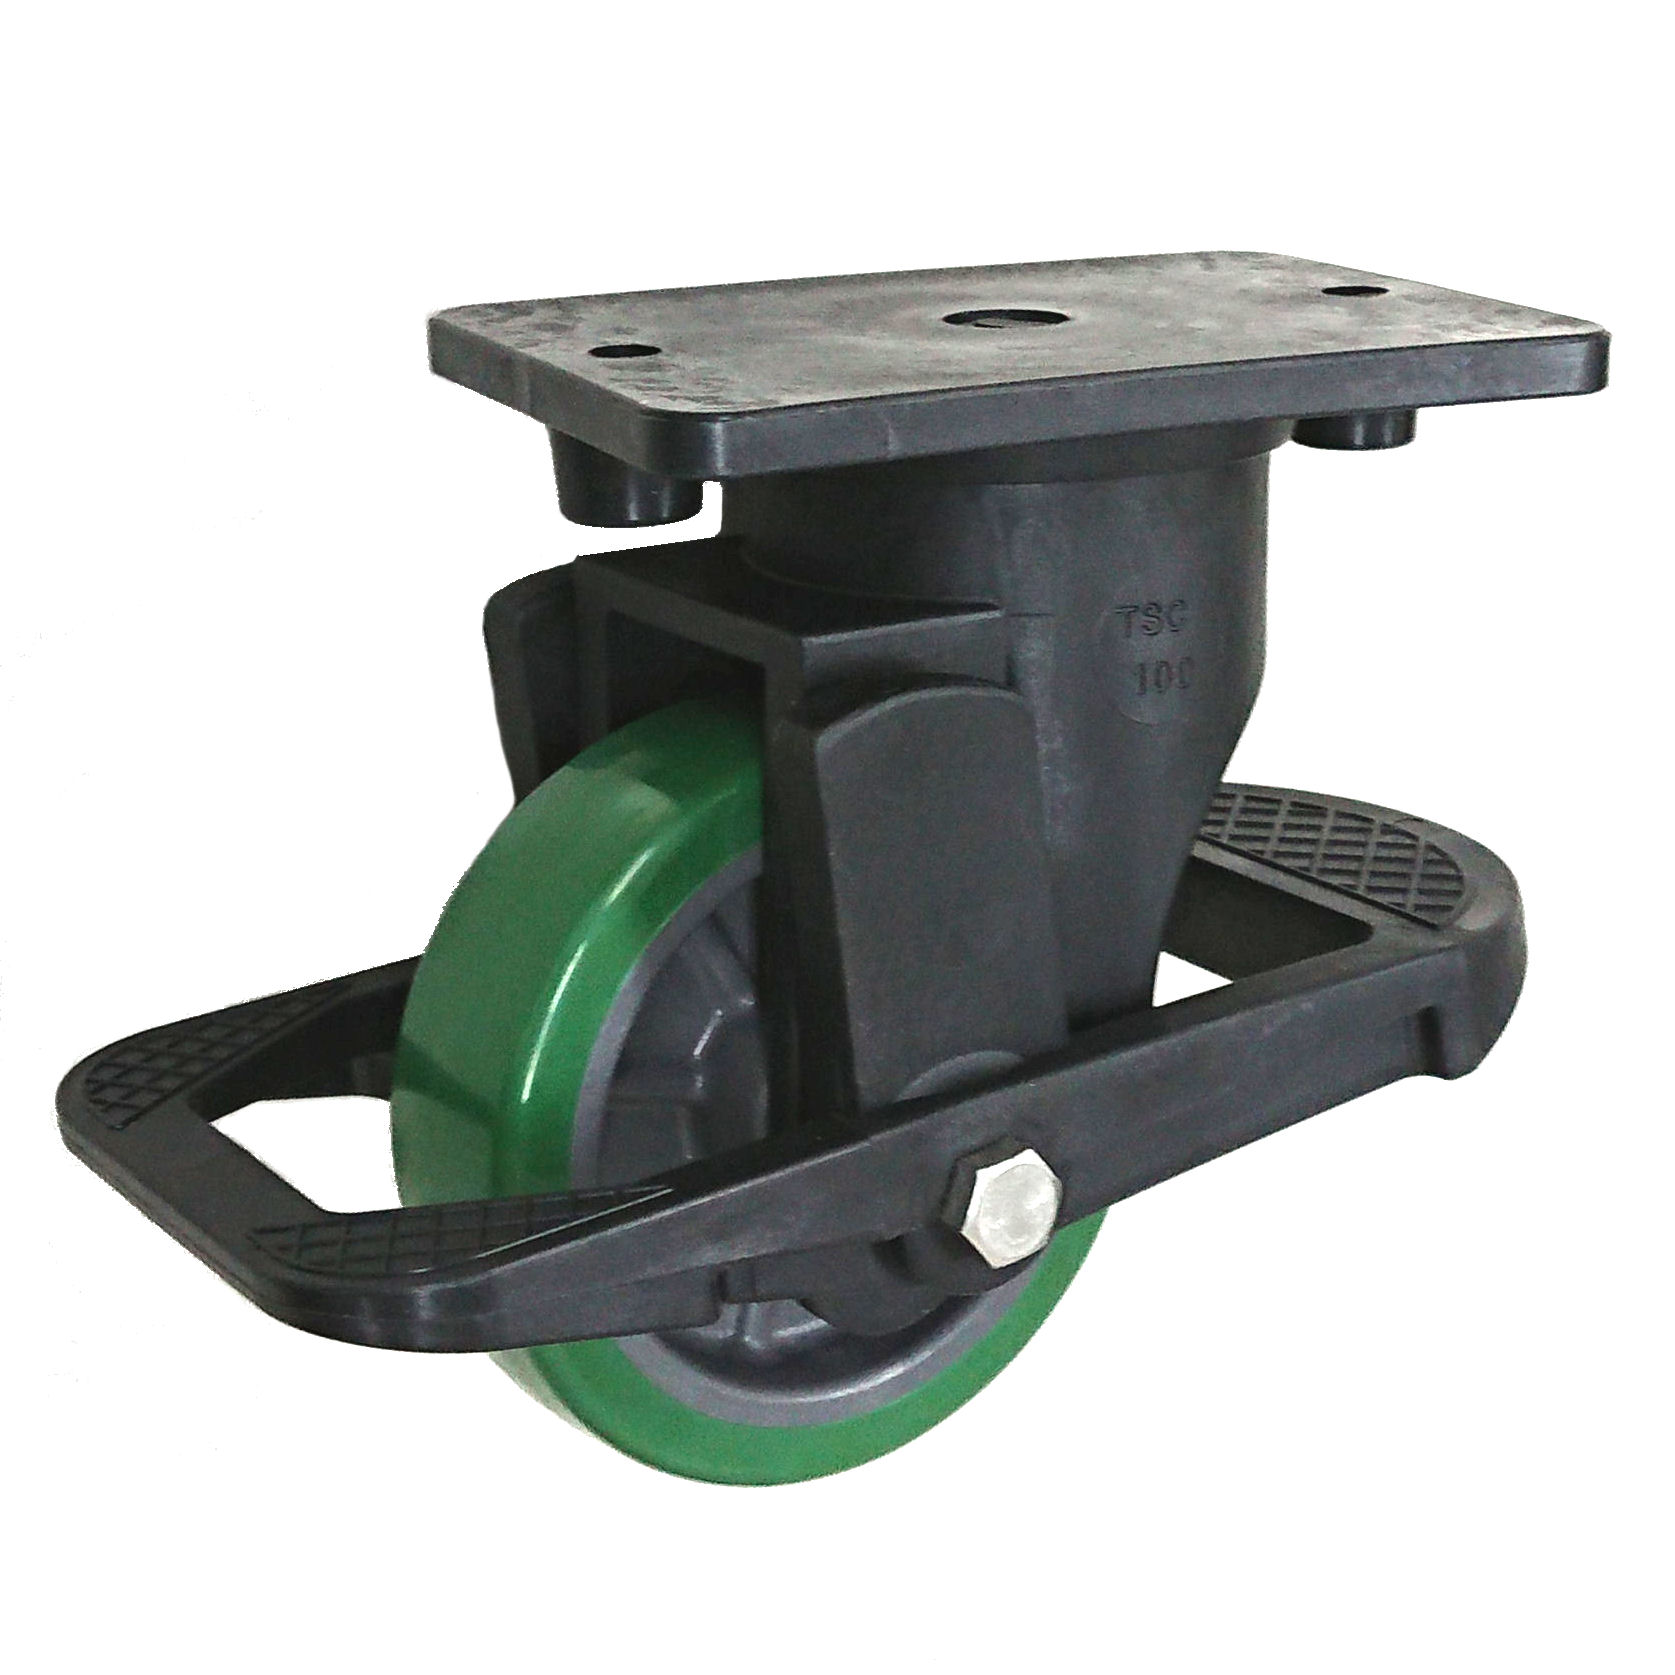 Casters - With resin frame, plate type. TJK-100